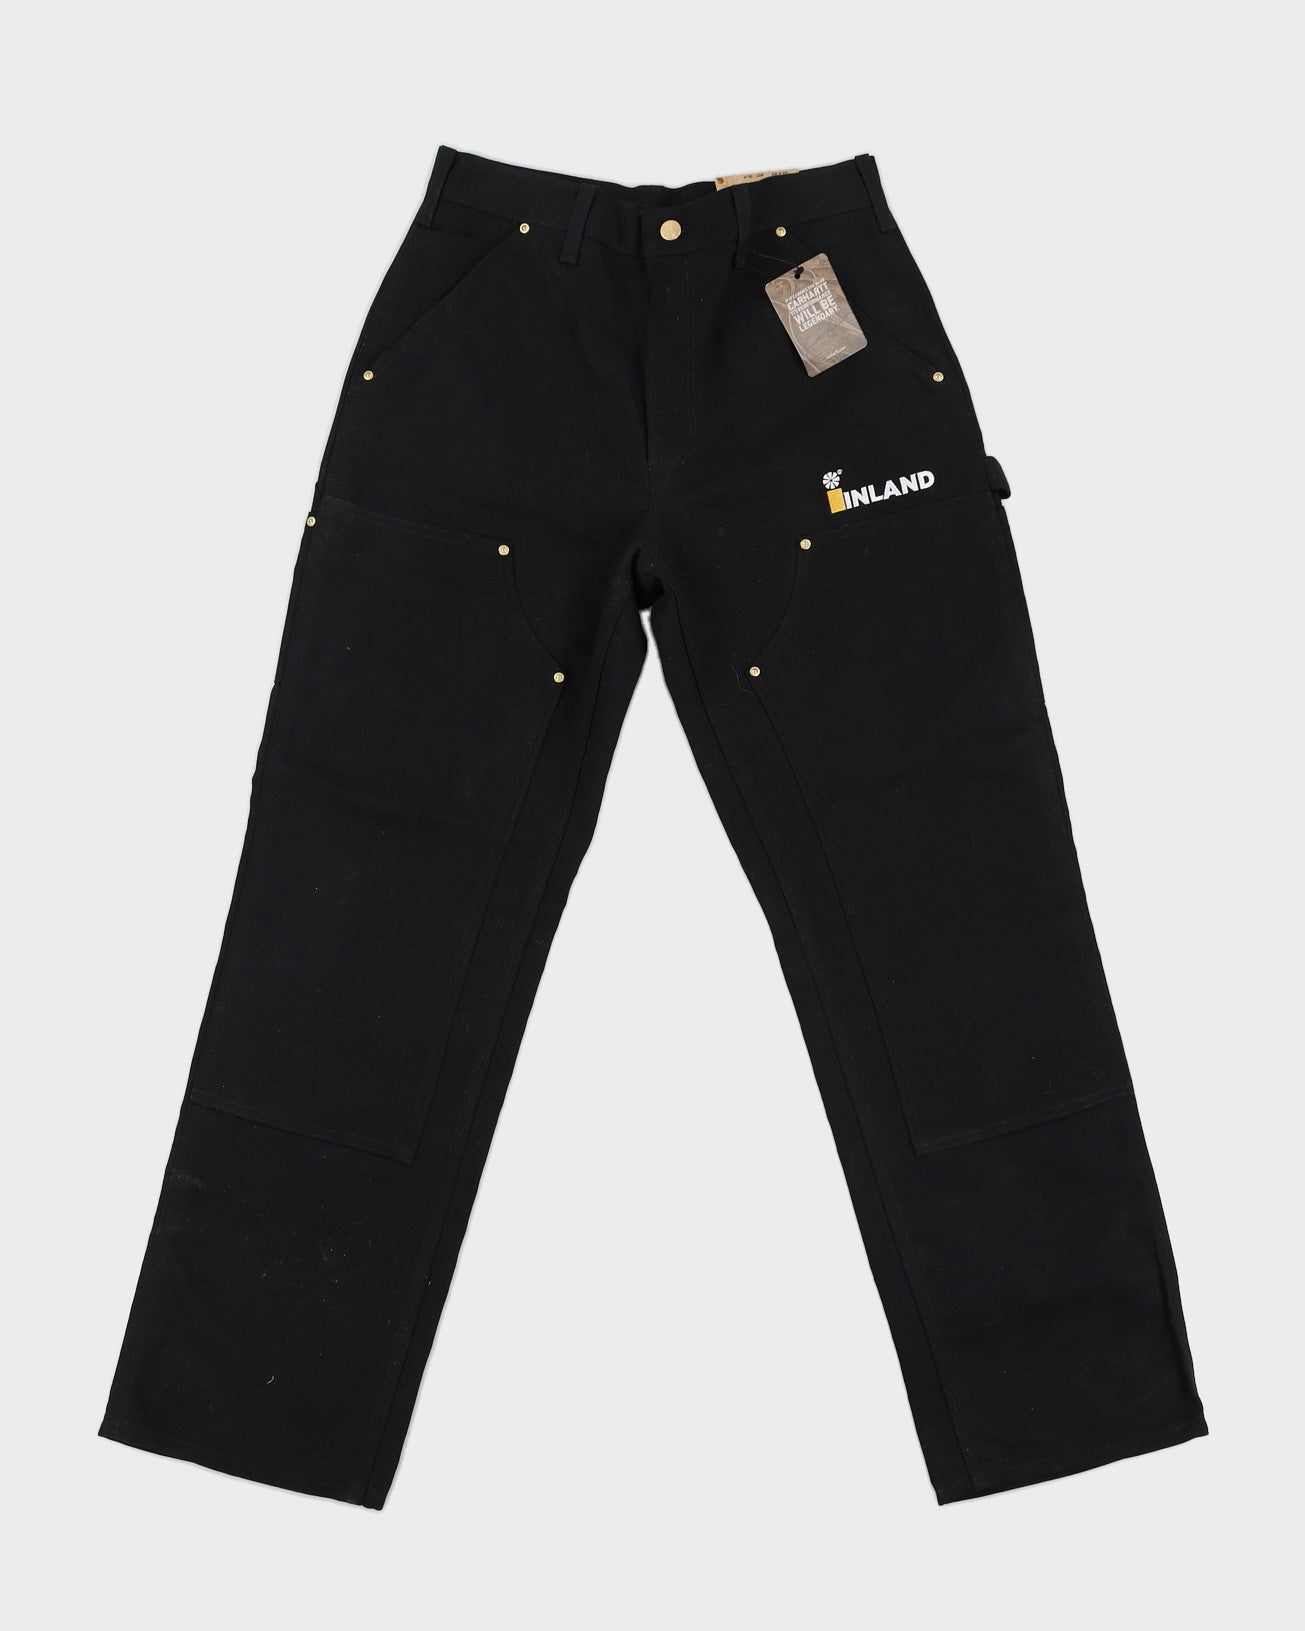 Carhartt Black Double Knee Work Trousers Deadstock With Tags  - W30 L30